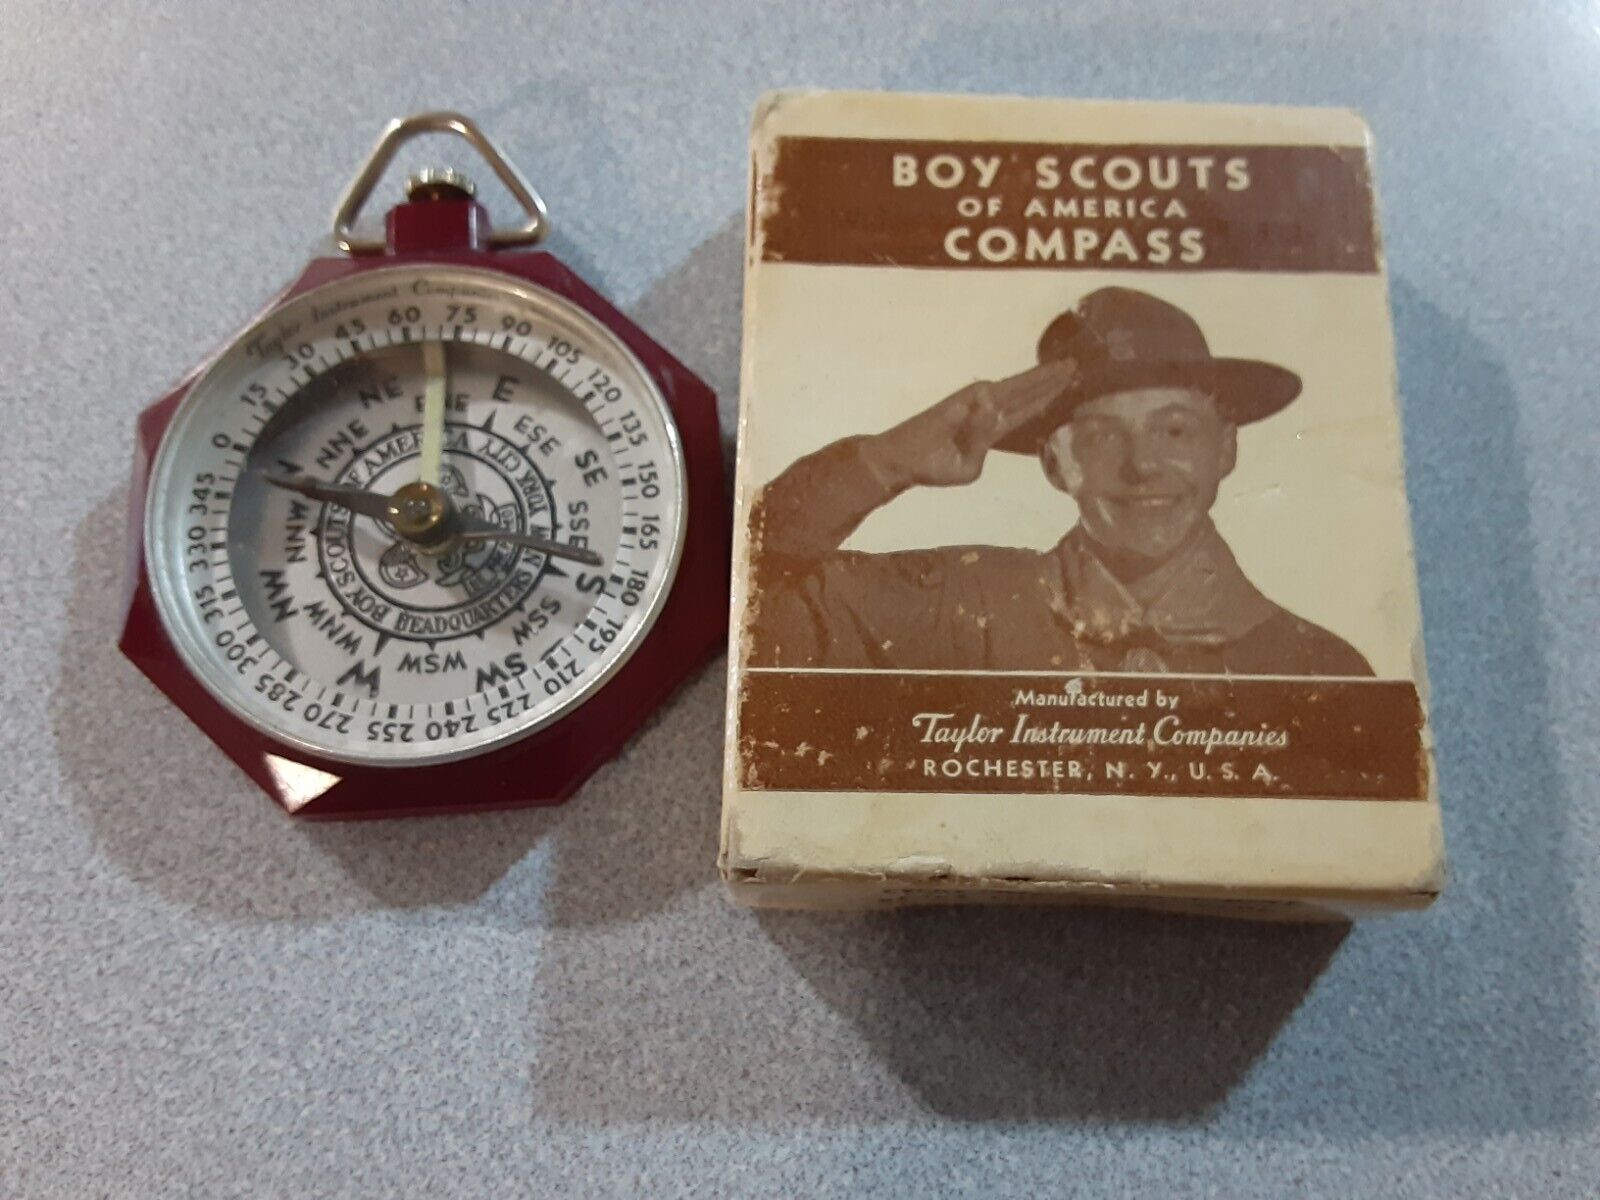 VINTAGE 1930S/1940S TAYLOR INSTRUMENT N.Y. BOY SCOUT COMPASS WITH ORIGINAL BOX